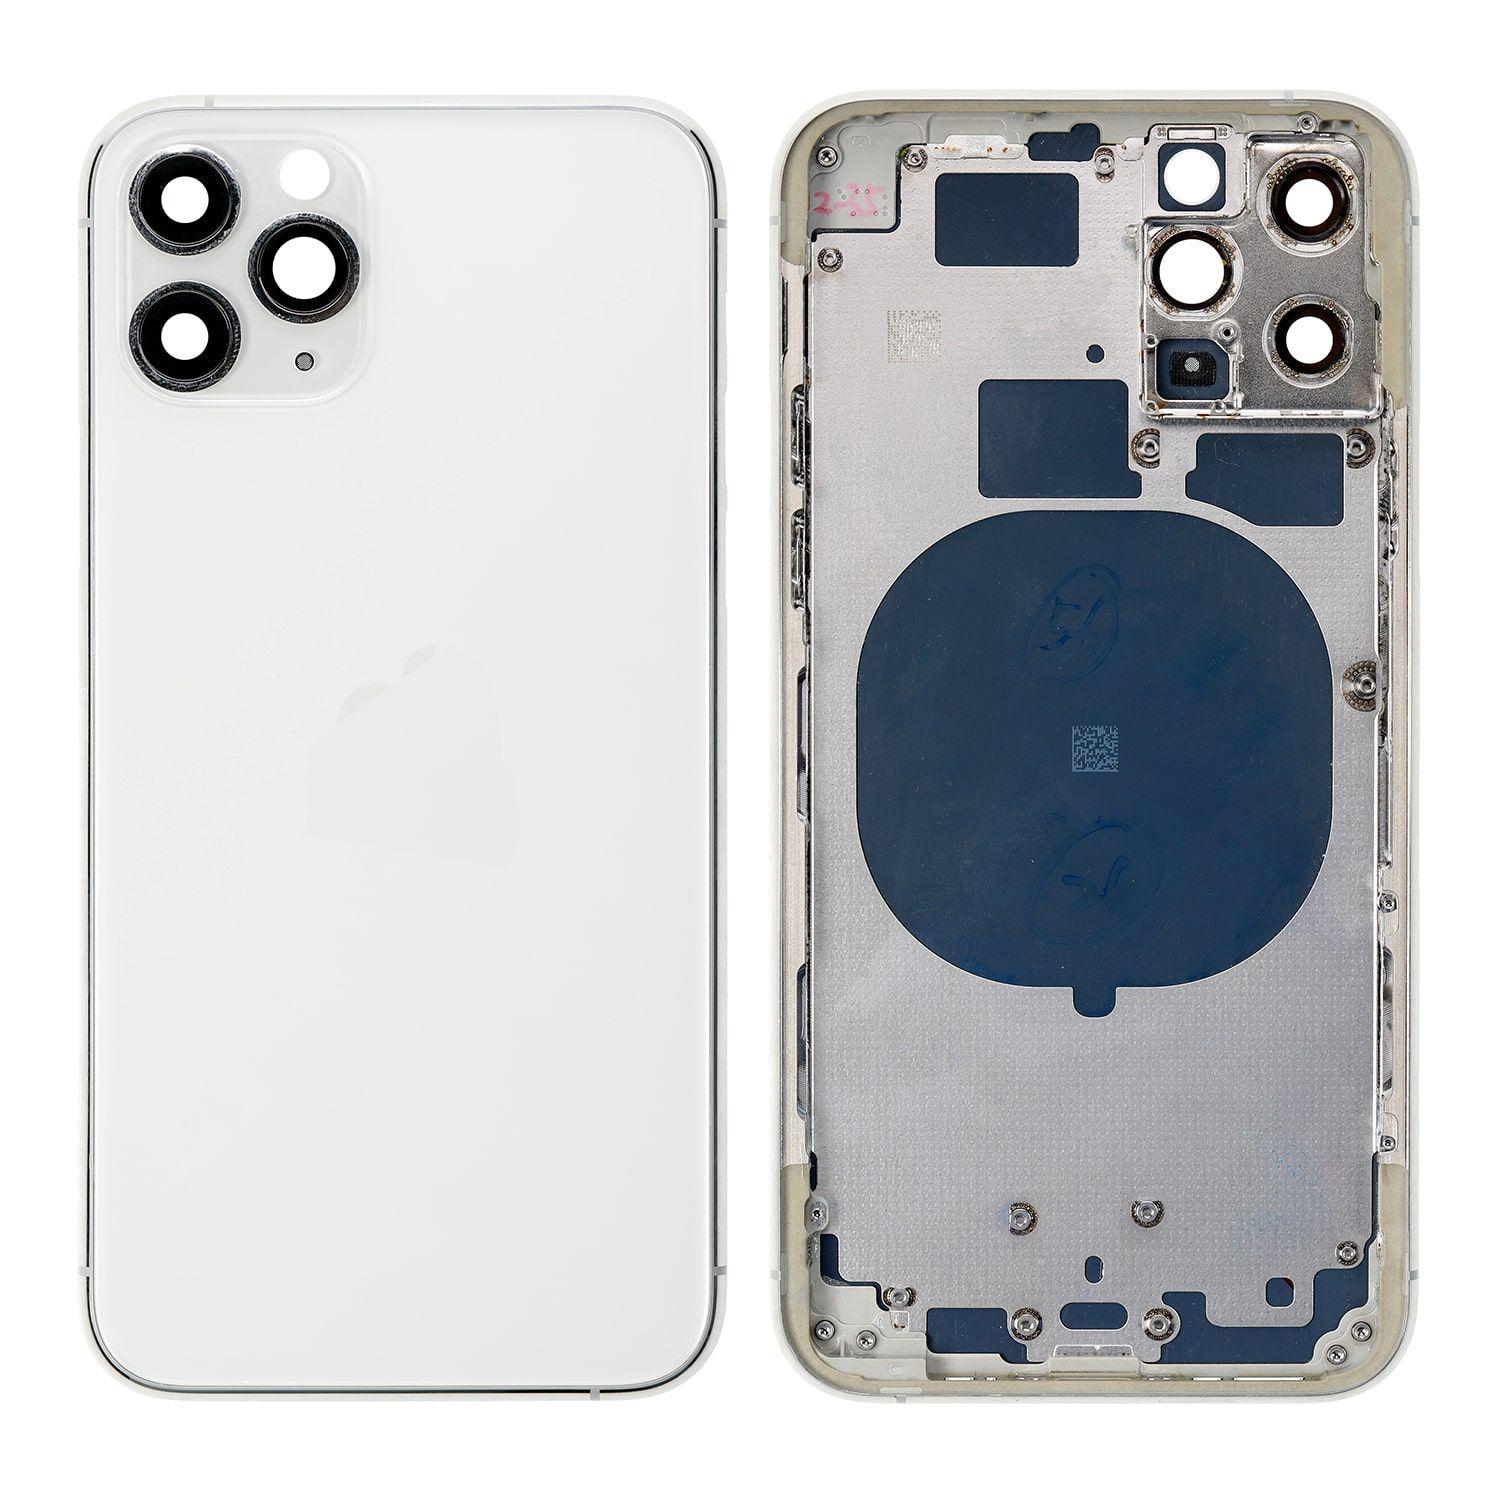 Body for iPhone 11 Pro Max + back cover white